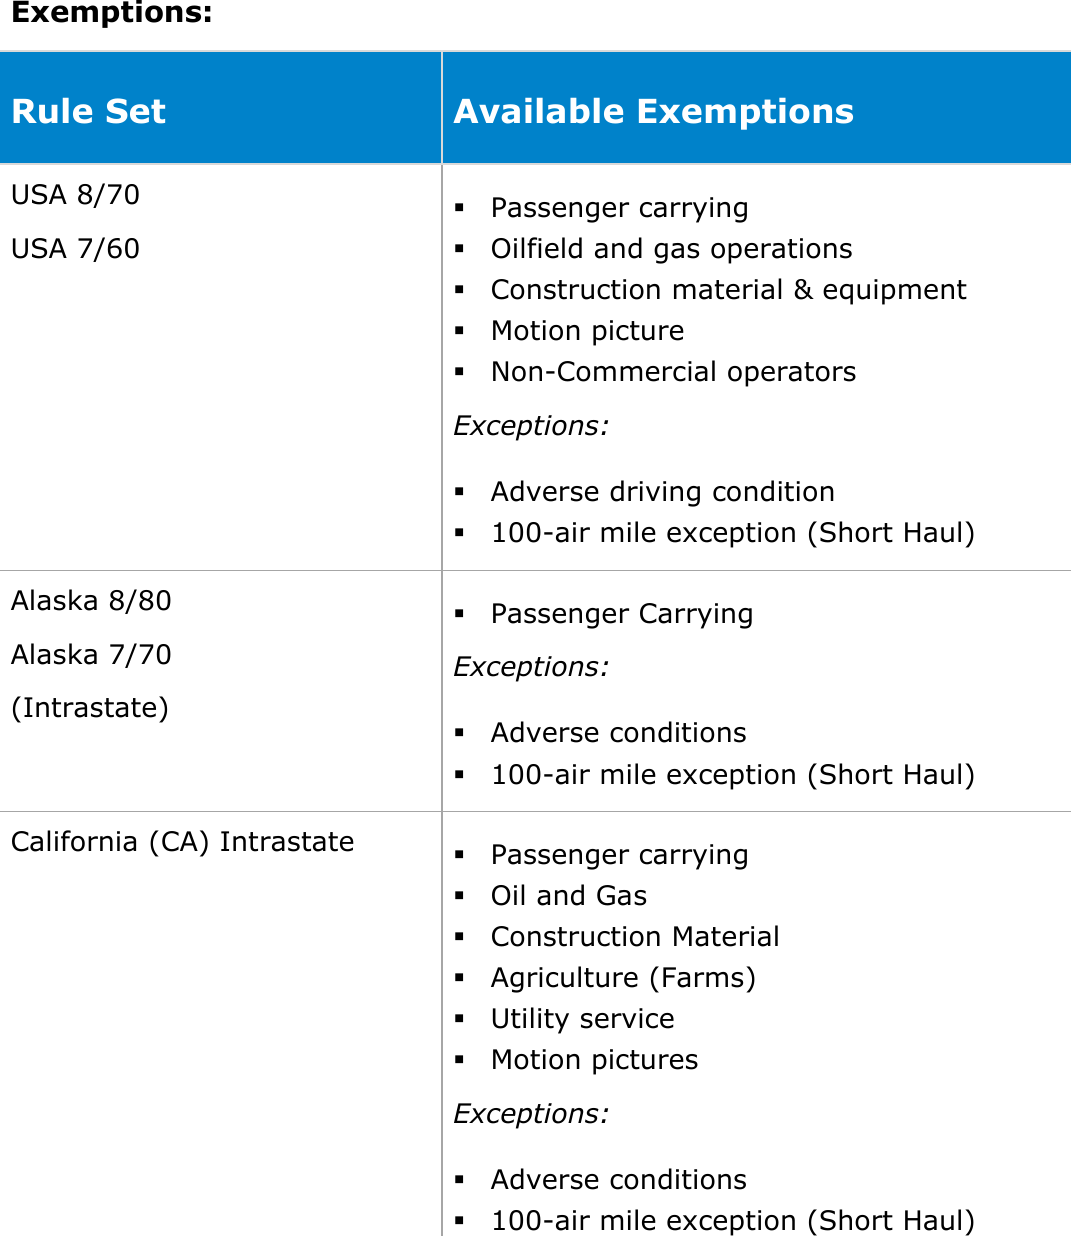  DriverConnect User Guide  87 © 2017, Rand McNally, Inc. Exemptions:  Rule Set Available Exemptions USA 8/70 USA 7/60  Passenger carrying  Oilfield and gas operations  Construction material &amp; equipment  Motion picture  Non-Commercial operators Exceptions:  Adverse driving condition  100-air mile exception (Short Haul) Alaska 8/80 Alaska 7/70 (Intrastate)  Passenger Carrying Exceptions:  Adverse conditions  100-air mile exception (Short Haul) California (CA) Intrastate  Passenger carrying  Oil and Gas  Construction Material  Agriculture (Farms)  Utility service  Motion pictures Exceptions:  Adverse conditions  100-air mile exception (Short Haul) 